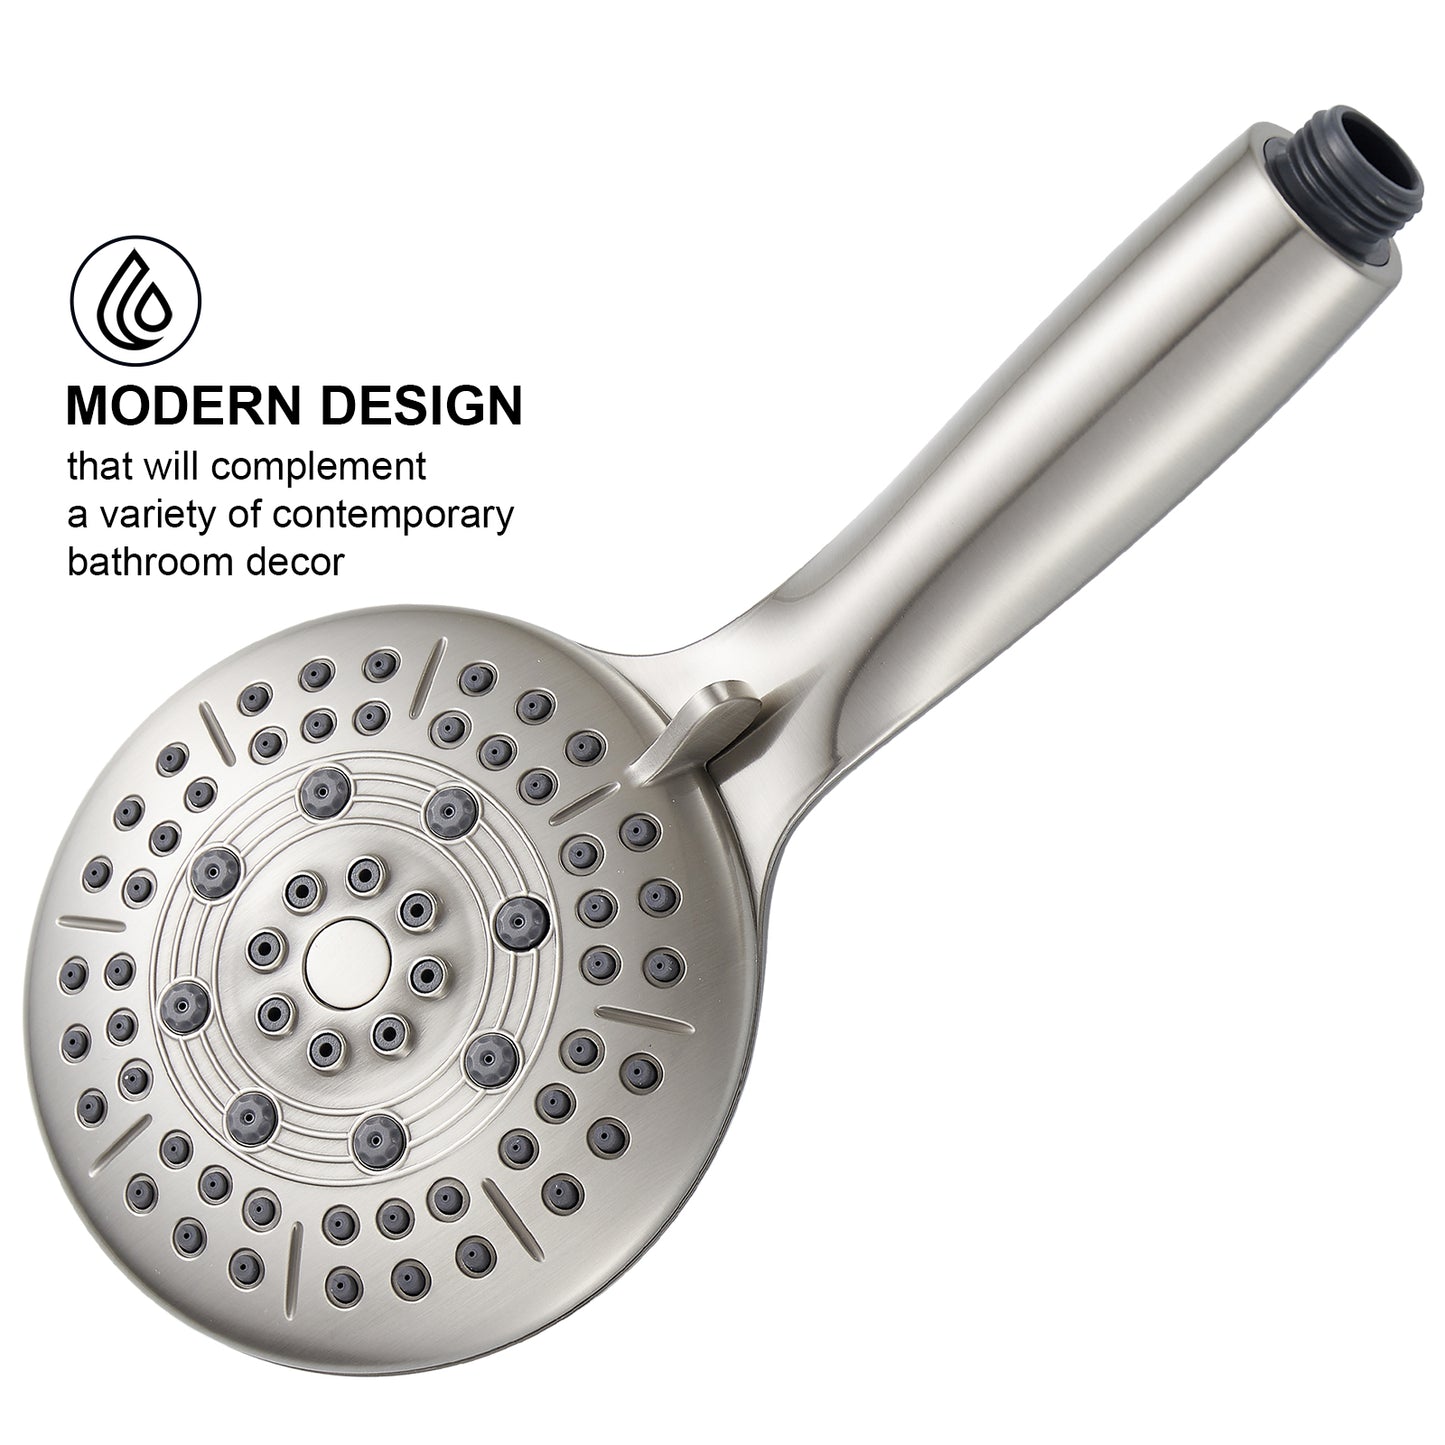 2-in-1 Single-Handle 6-Spray Round Shower Faucet with Dual Shower Heads and Tub Spout  (Valve Included)